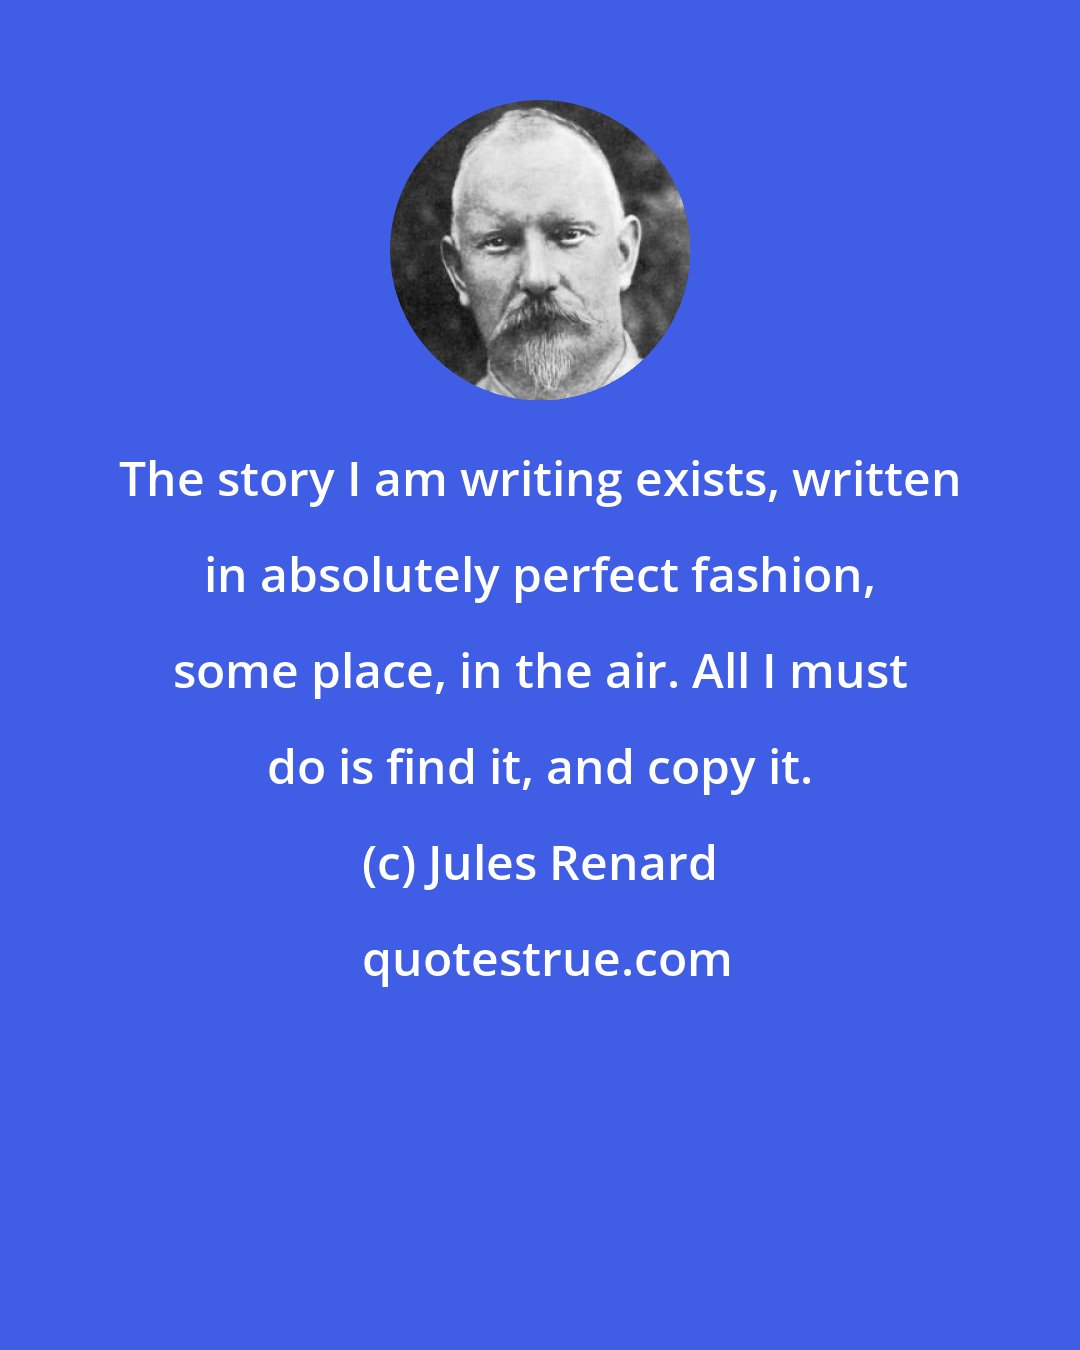 Jules Renard: The story I am writing exists, written in absolutely perfect fashion, some place, in the air. All I must do is find it, and copy it.